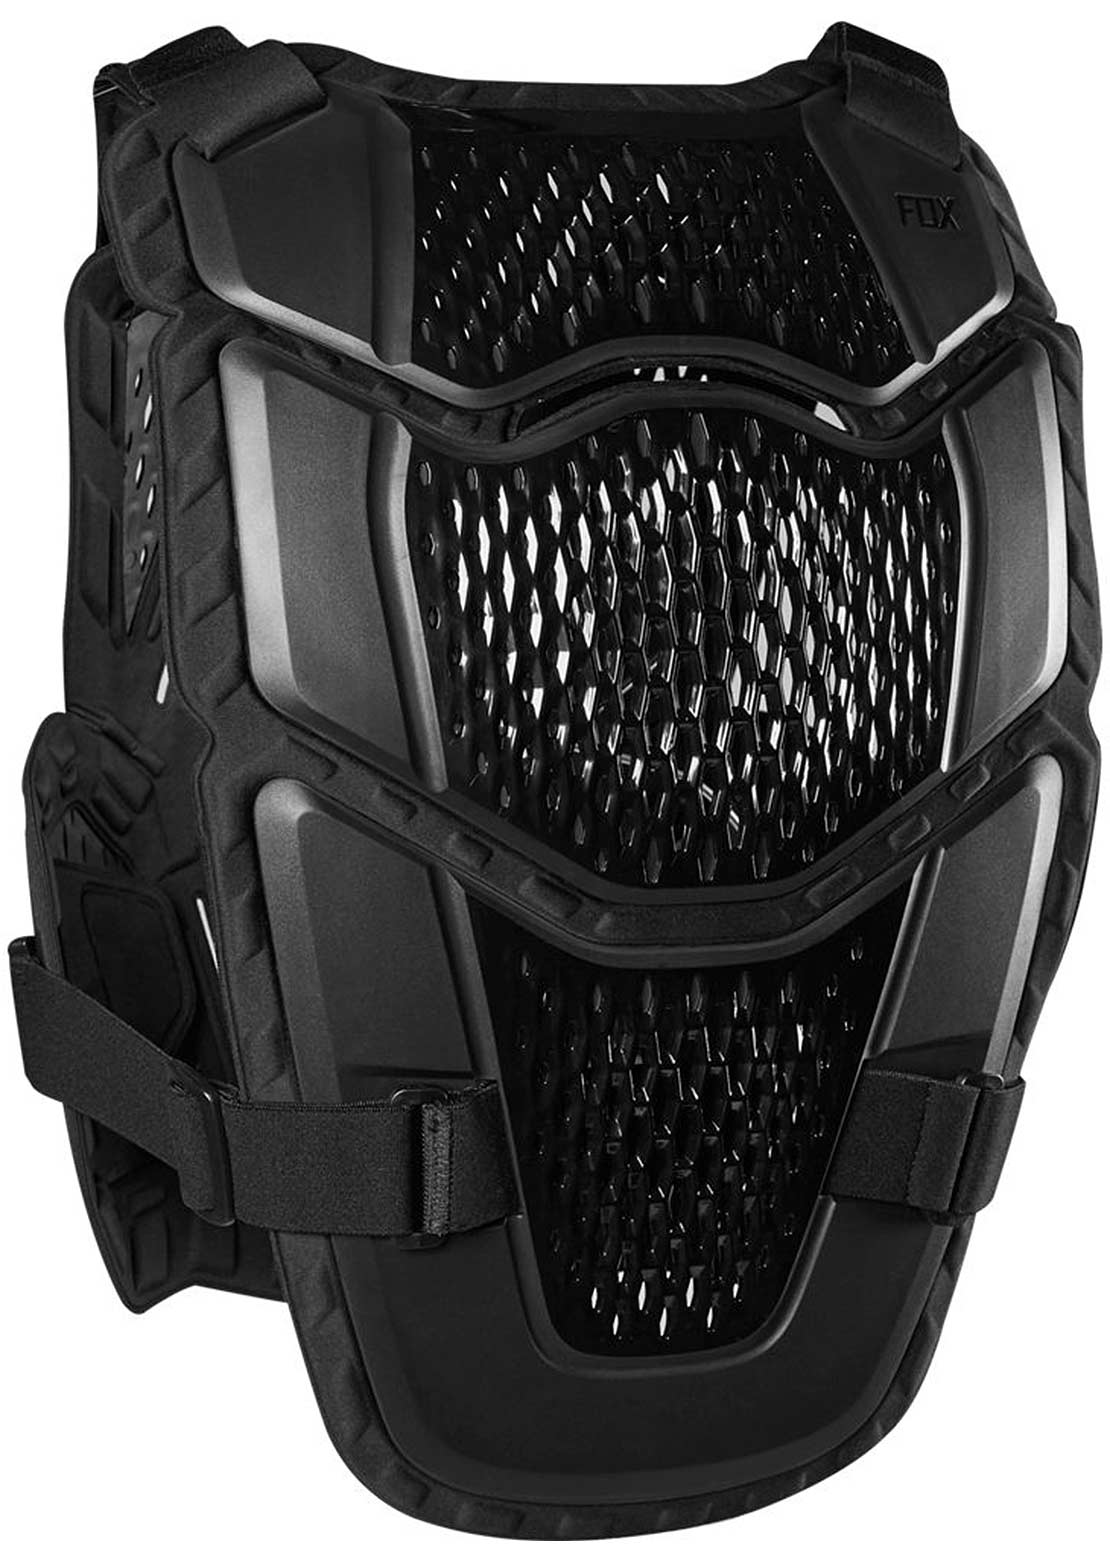 Fox Junior Raceframe Roost Chest Guard Black